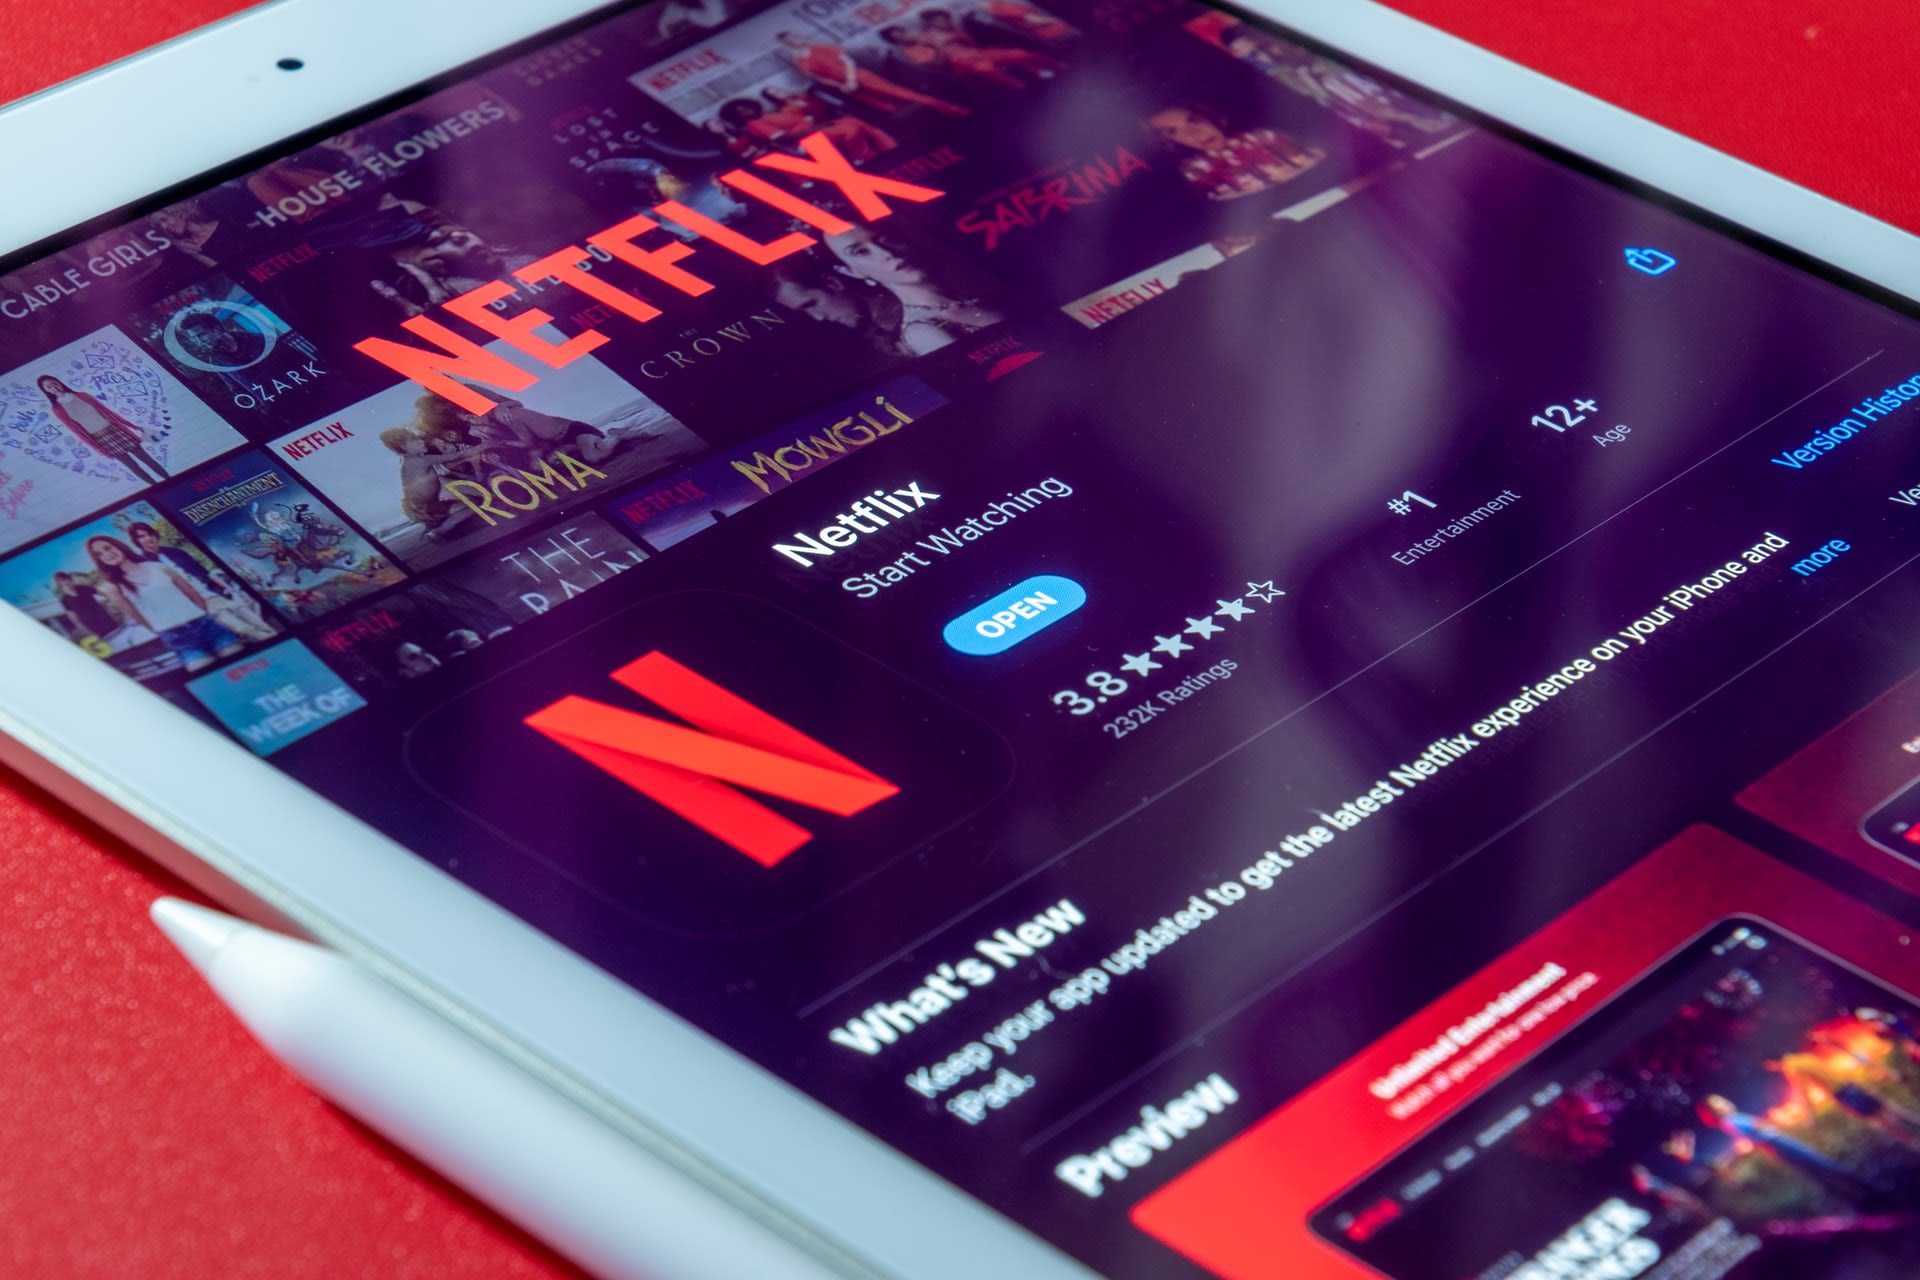 Is Netflix Inc (NASDAQ:NFLX) an Overvalued Tech Stock You Should Sell?